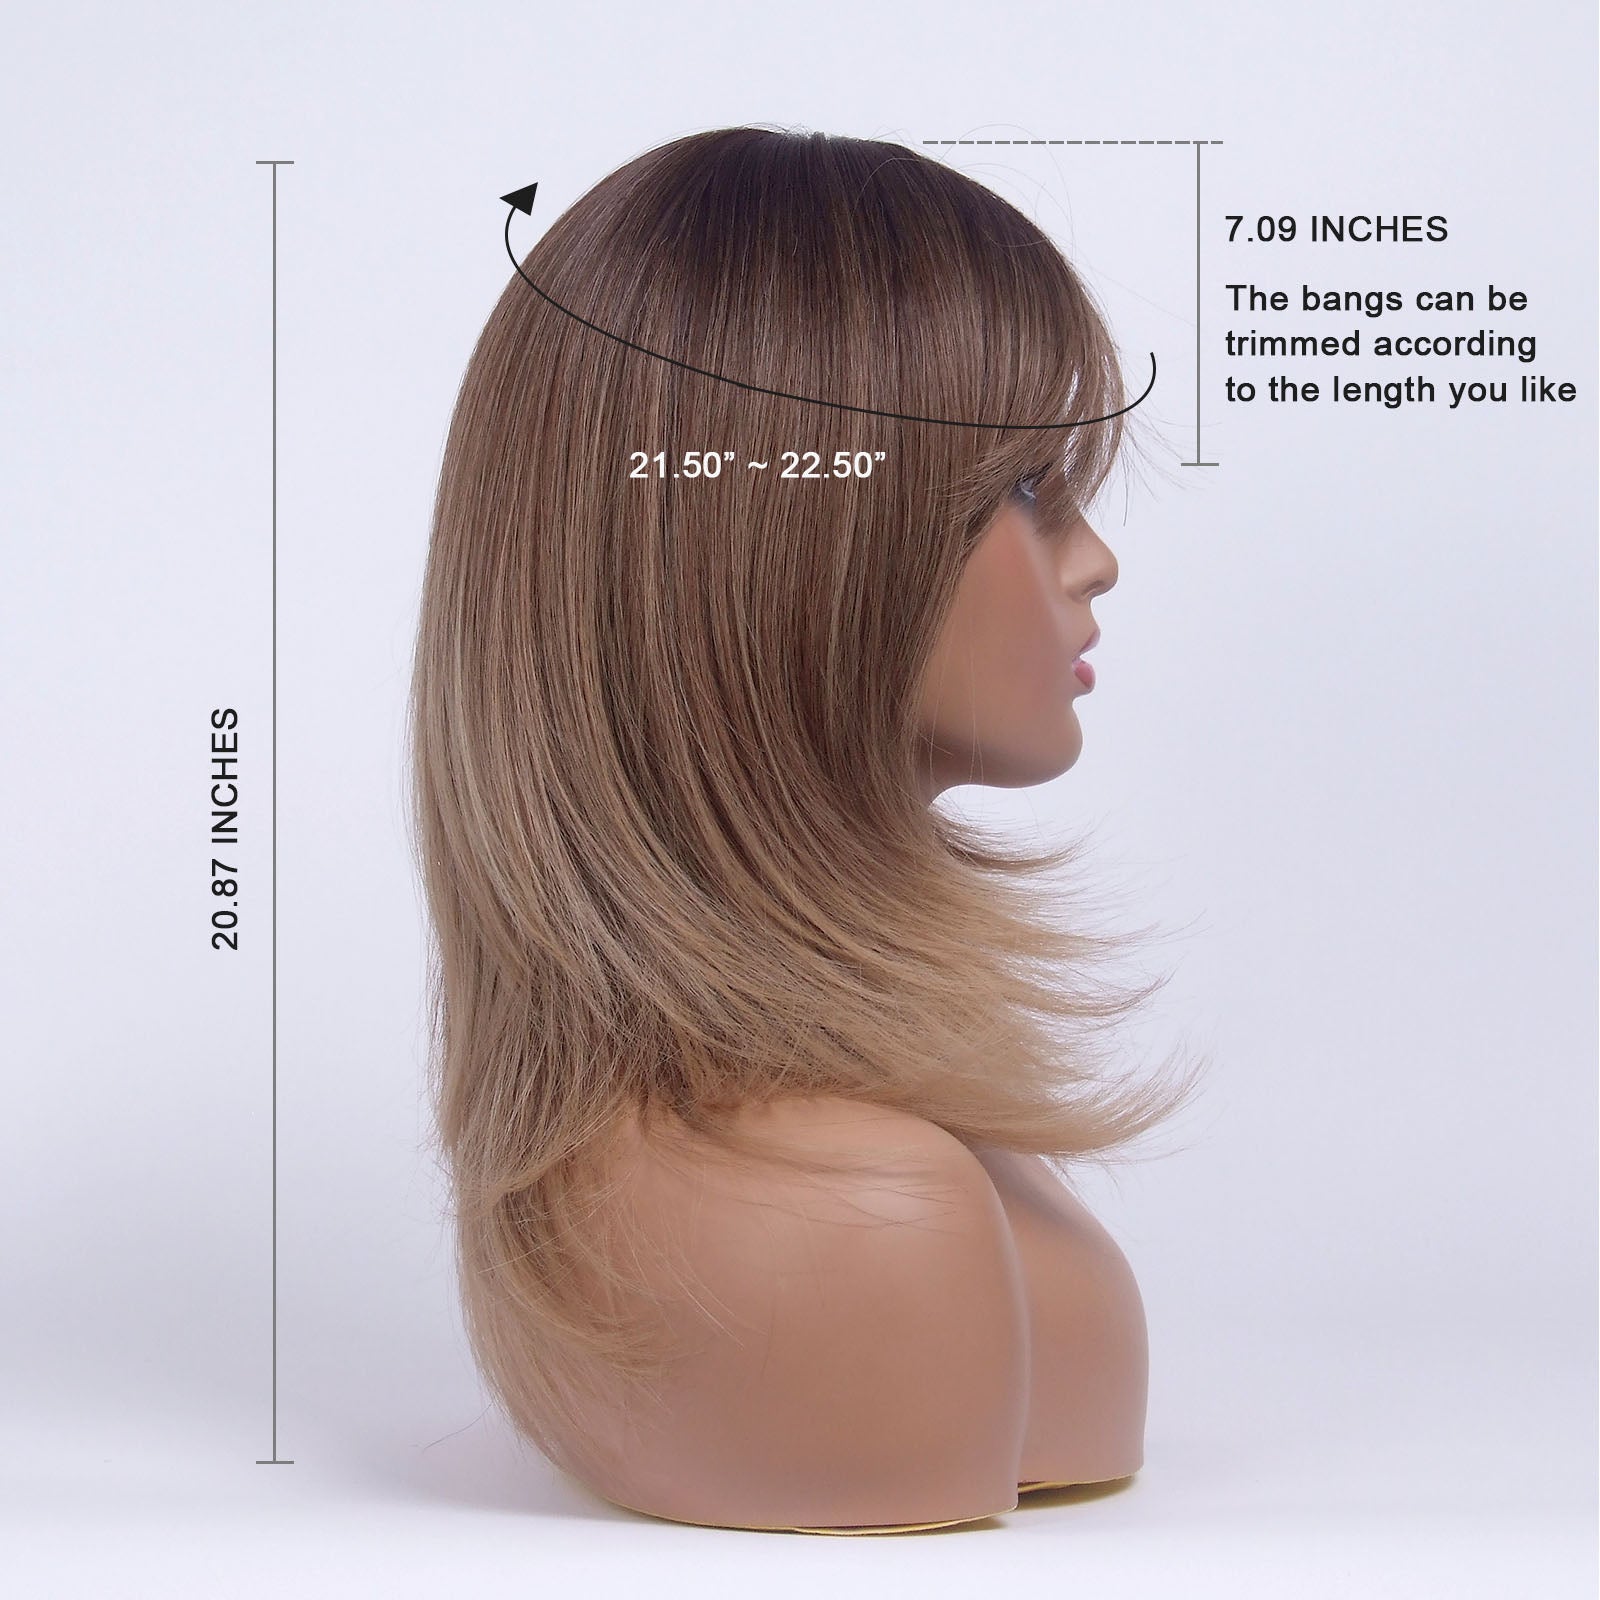 LINGDORA Ombre Brown Shoulder-Length Wig With Bangs for White Women Synthetic Hair